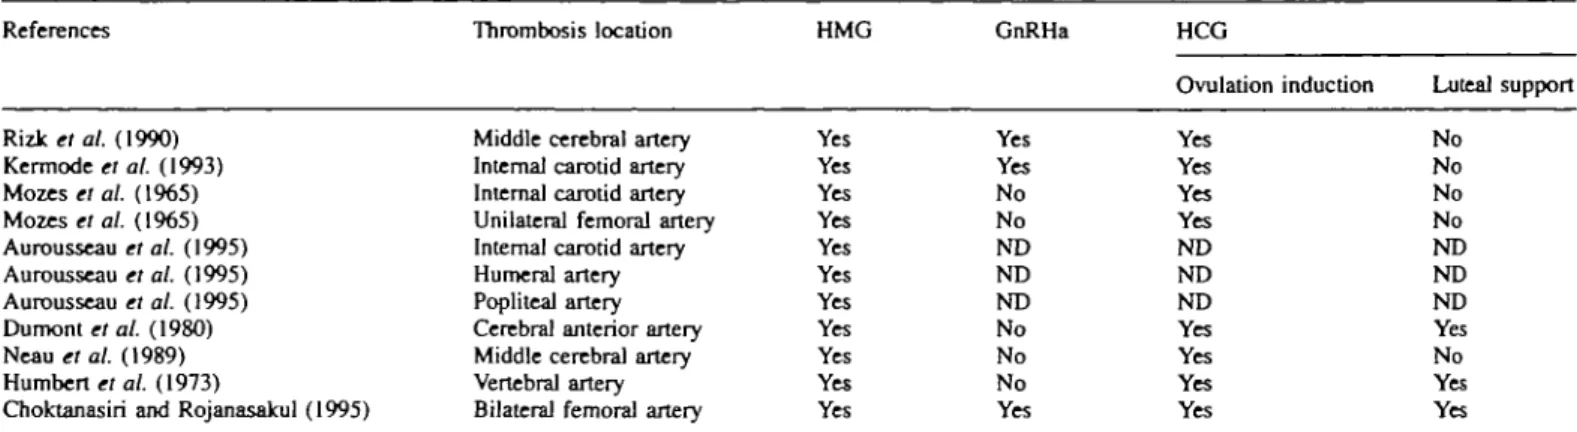 Table I. Menotrophins and gonadotrophin-releasing hormone analogue (GnRHa) use in the 11 reviewed cases of arterial thrombosis associated with ovarian hyperstimulation syndrome